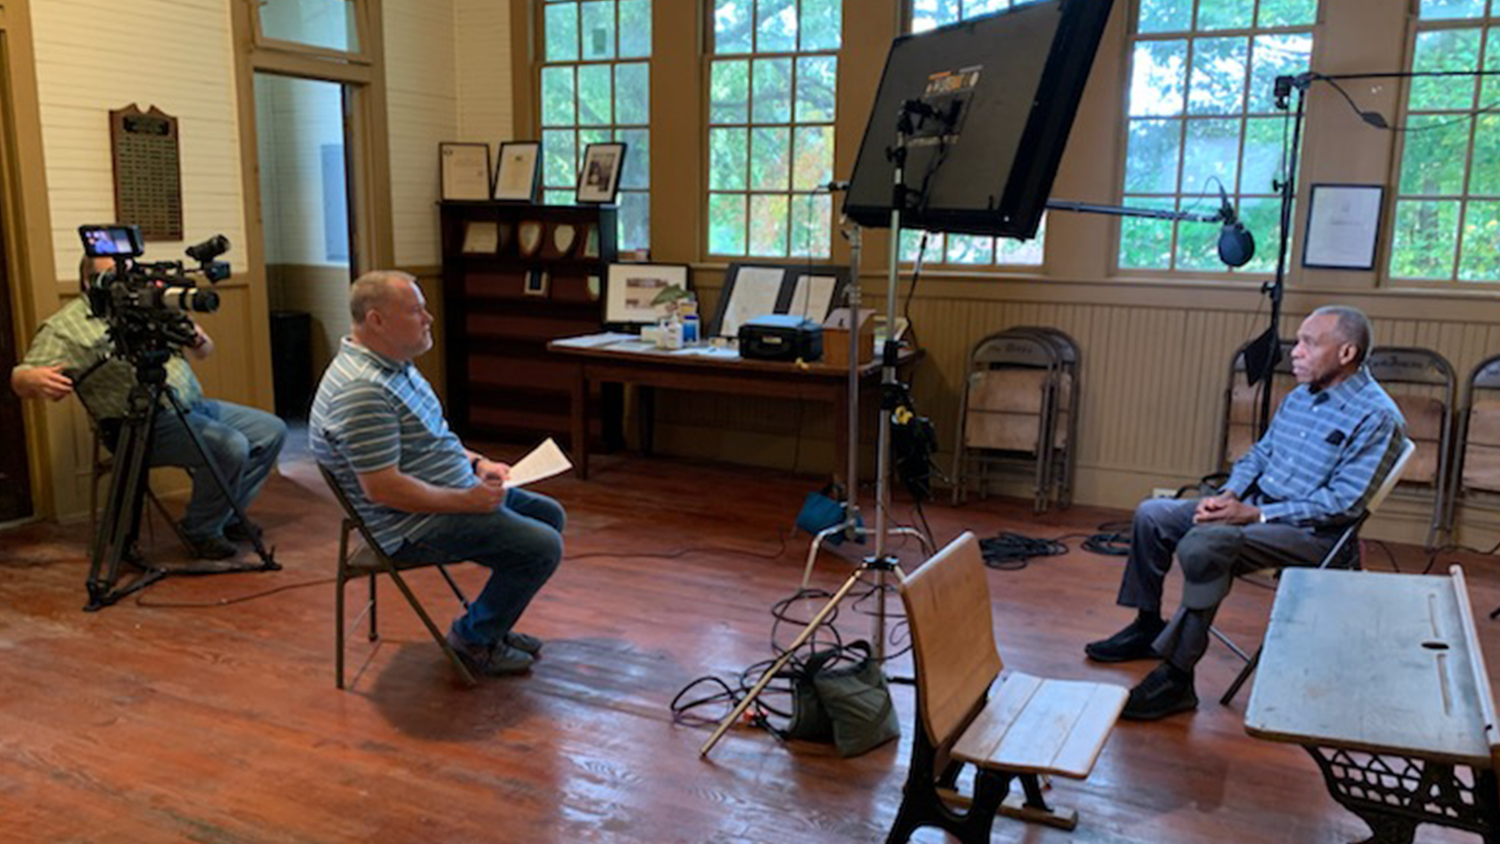 TELS Department Head Kevin Oliver conducts interviews as part of a virtual tour to preserve the Historic Russell School.